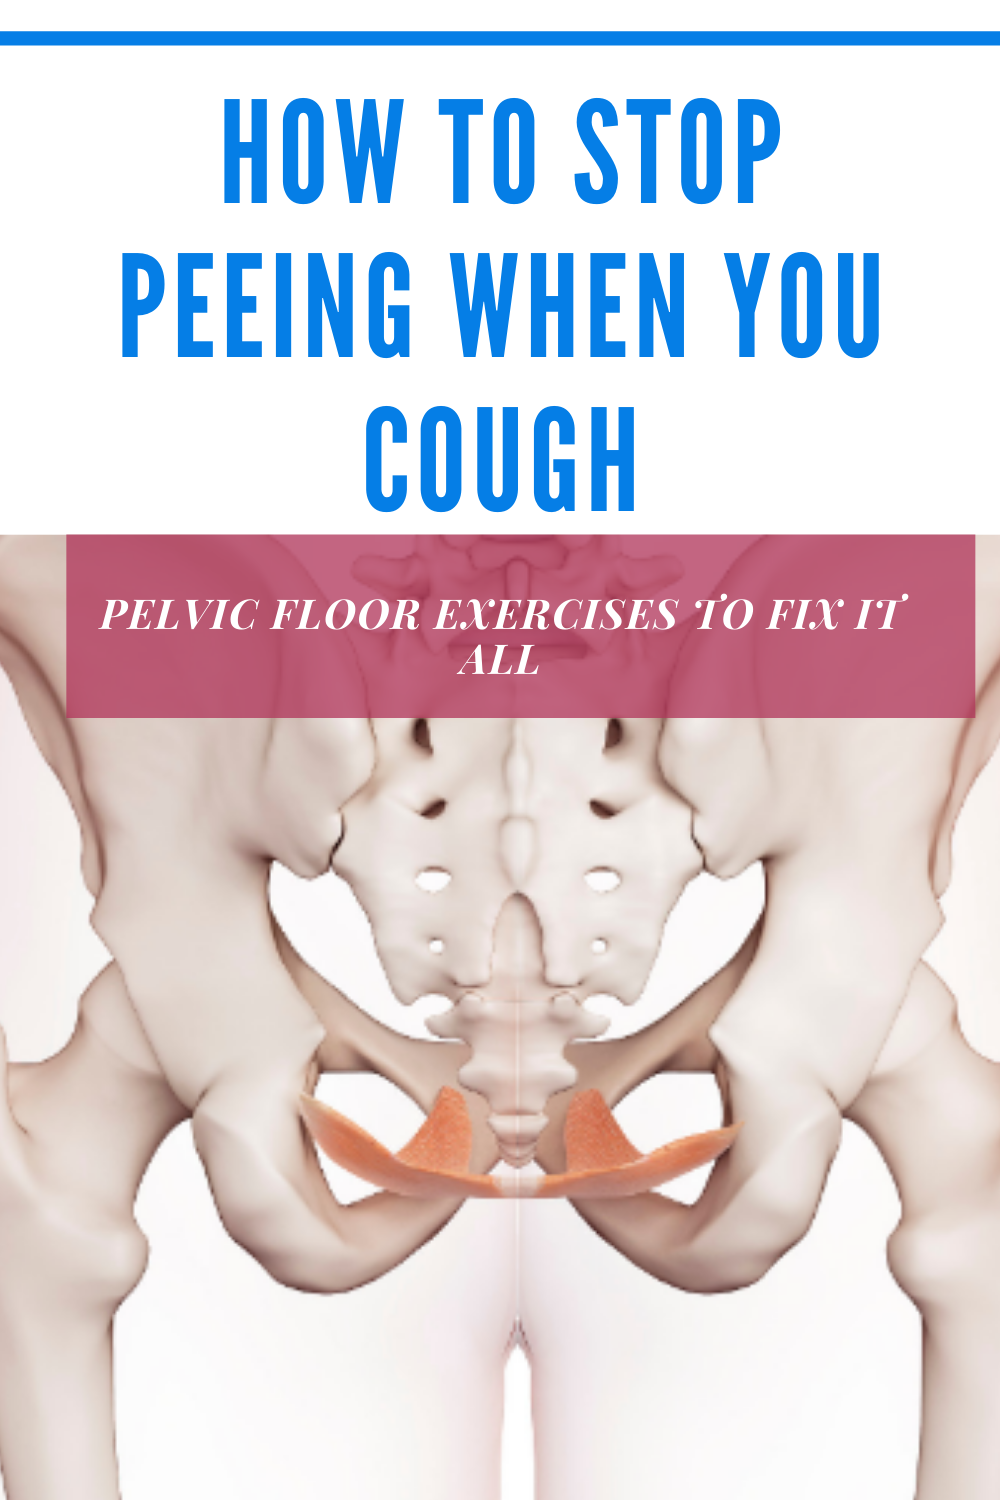 How to stop peeing when you cough